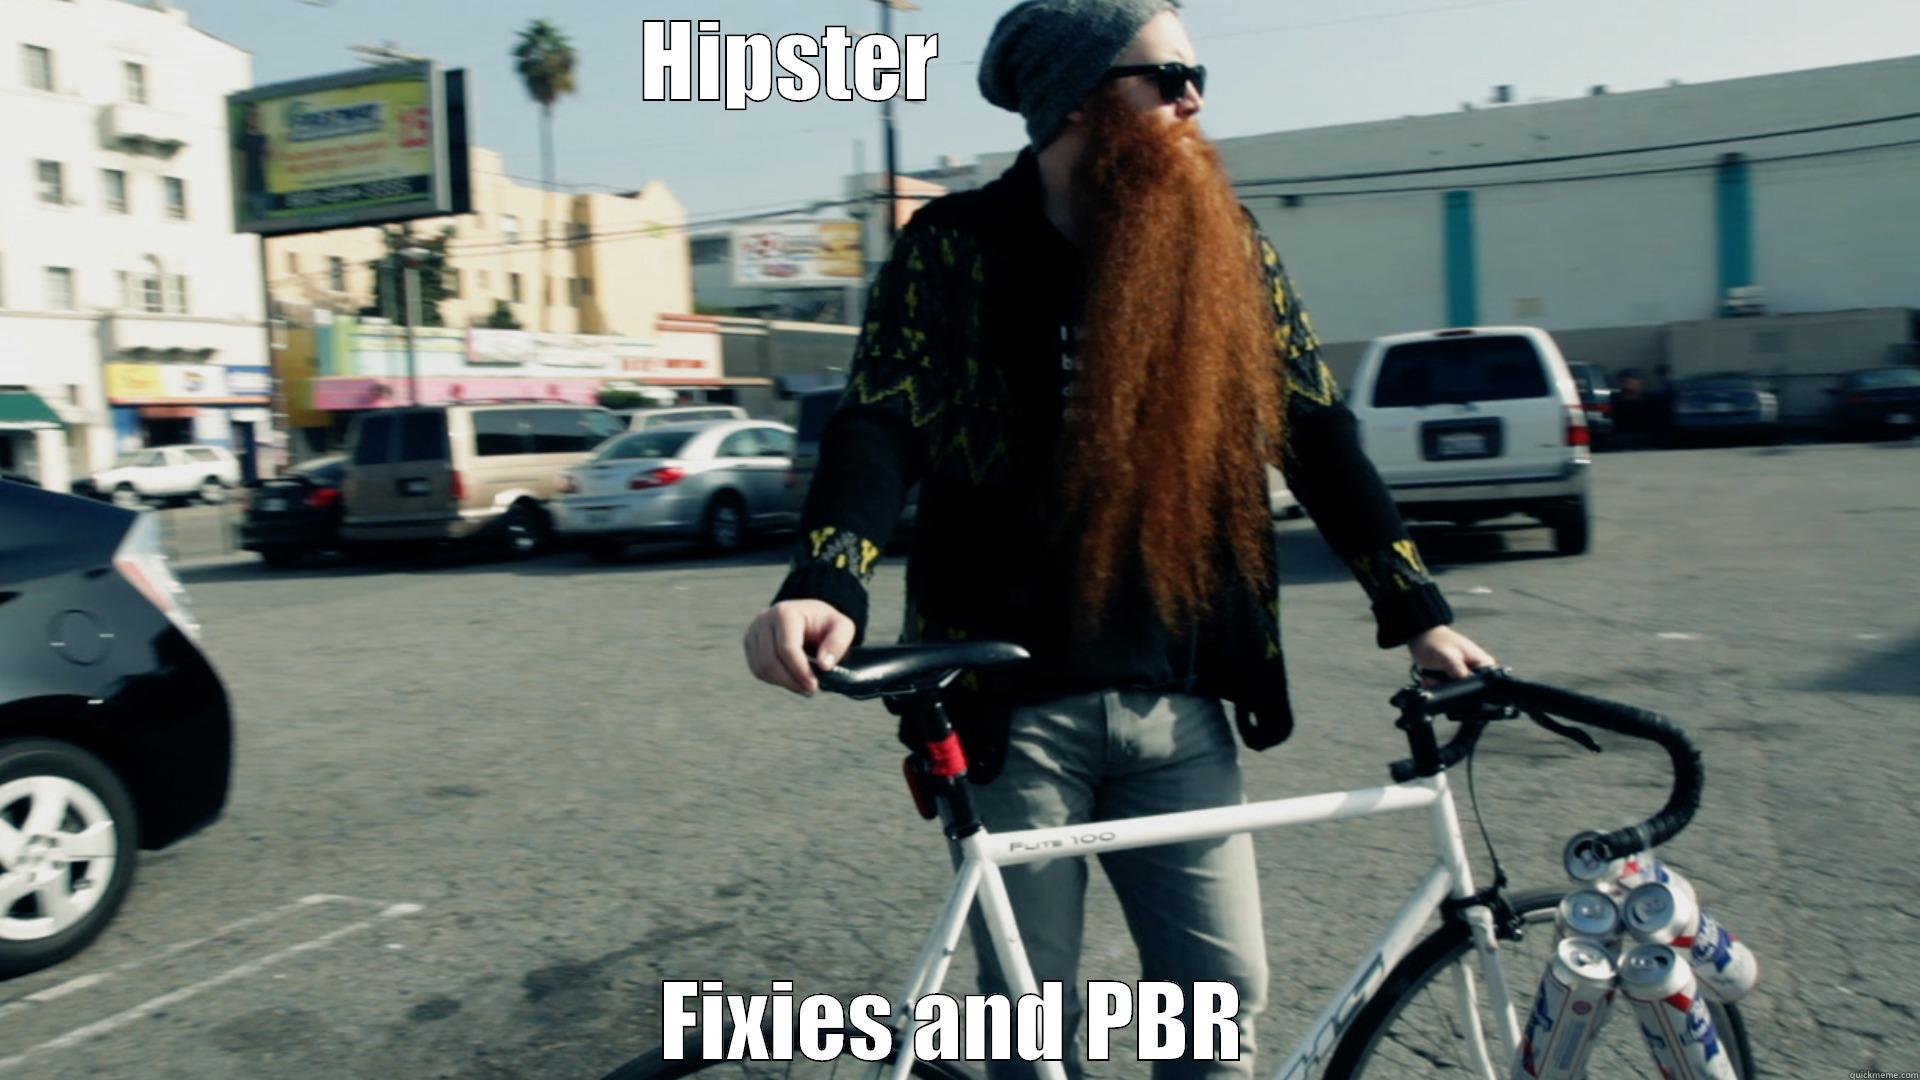 HIPSTER                   FIXIES AND PBR Misc